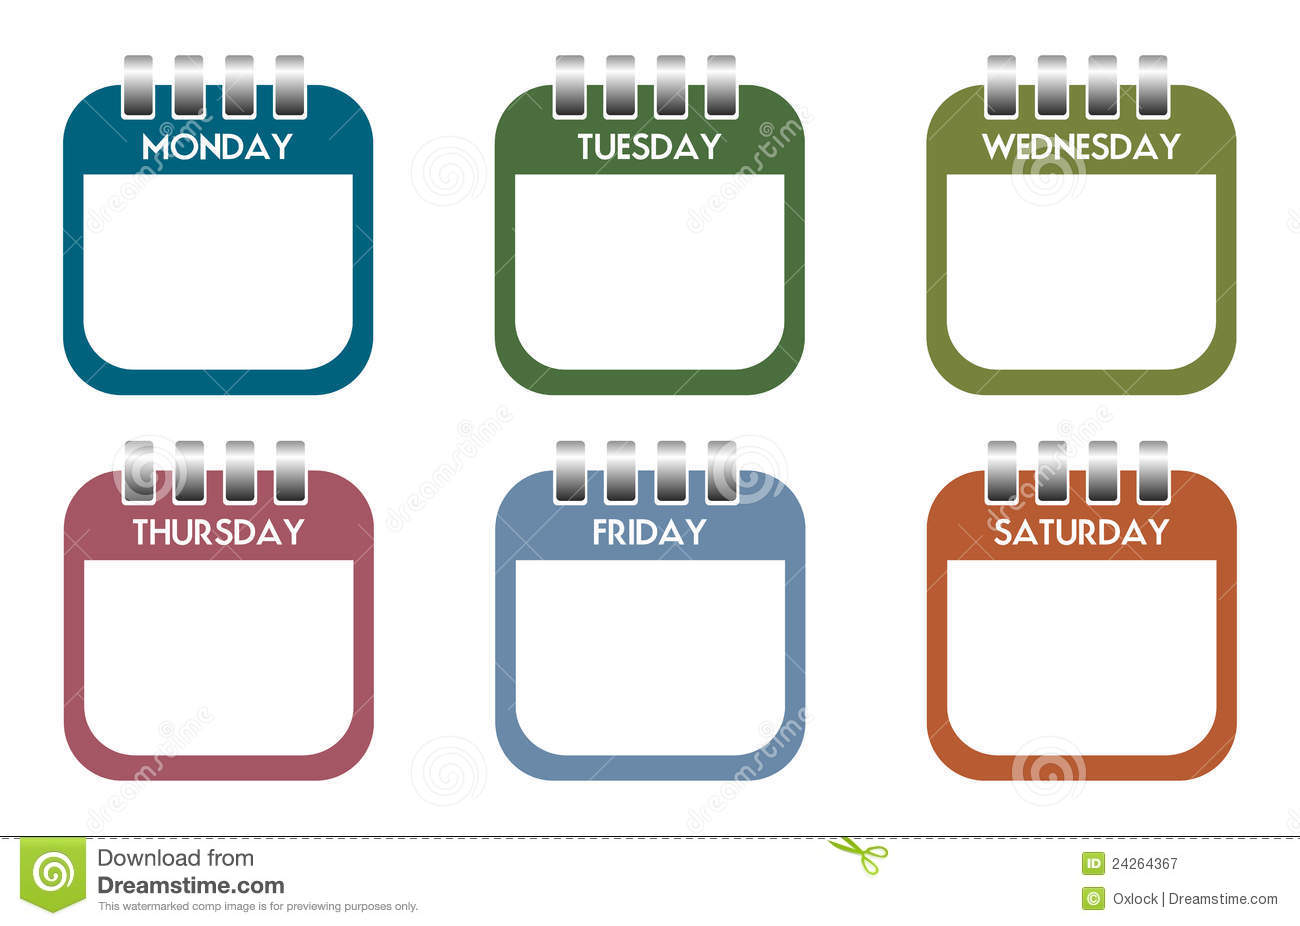 Set Of Six Colorful Calendar Sheets With The Days Of The Week Written